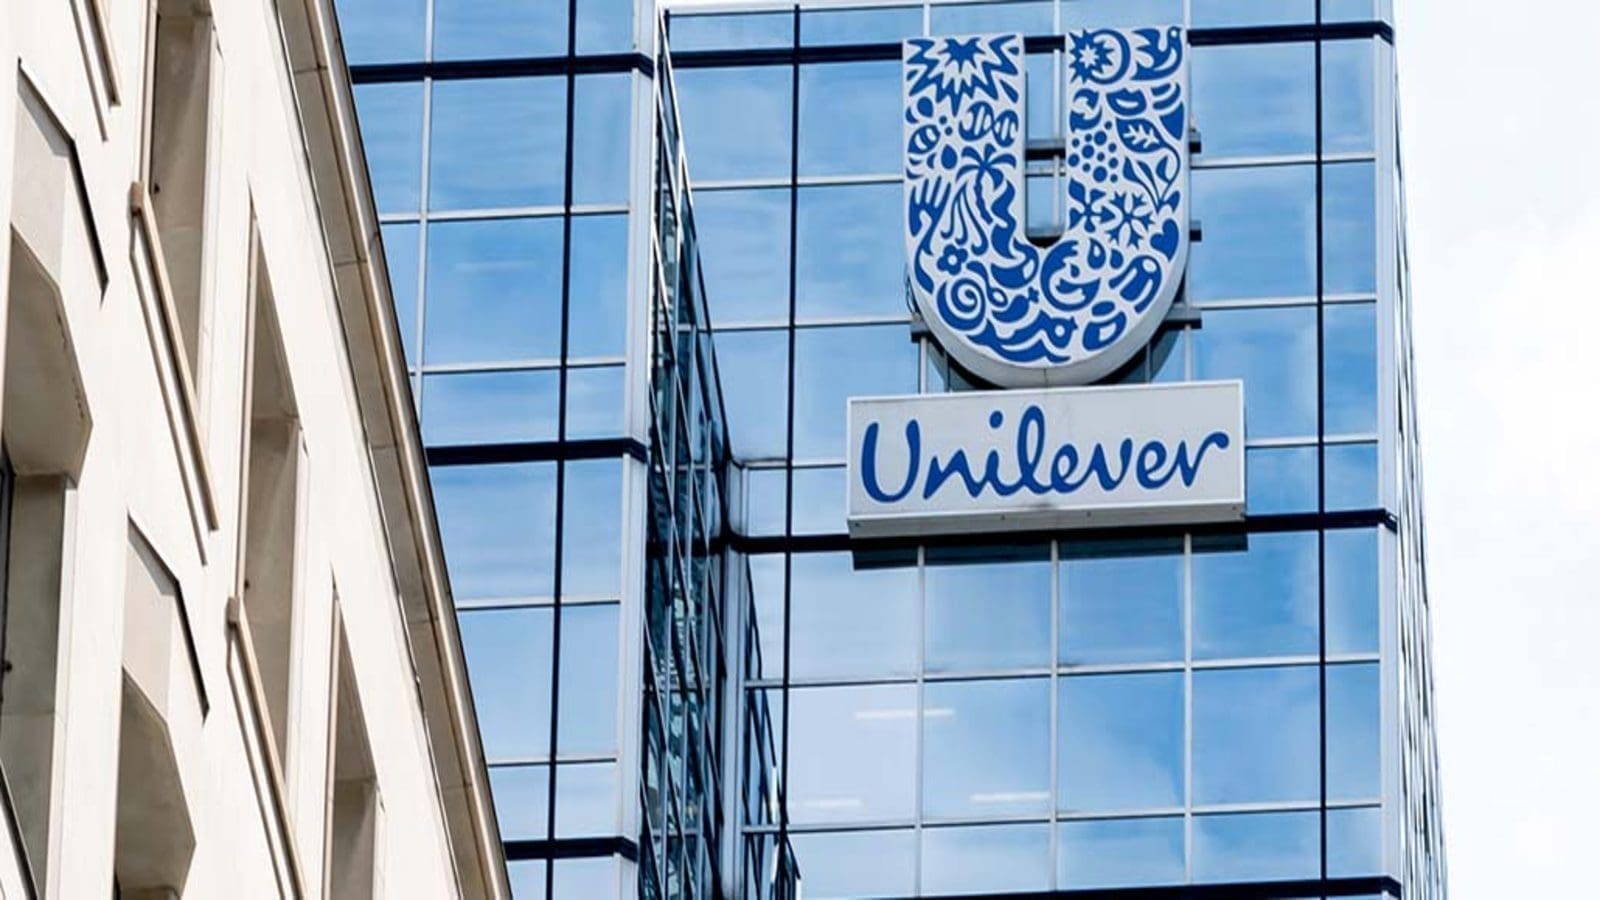 Unilever trials warmer ice cream freezer cabinets in push to cut down energy use and carbon emissions